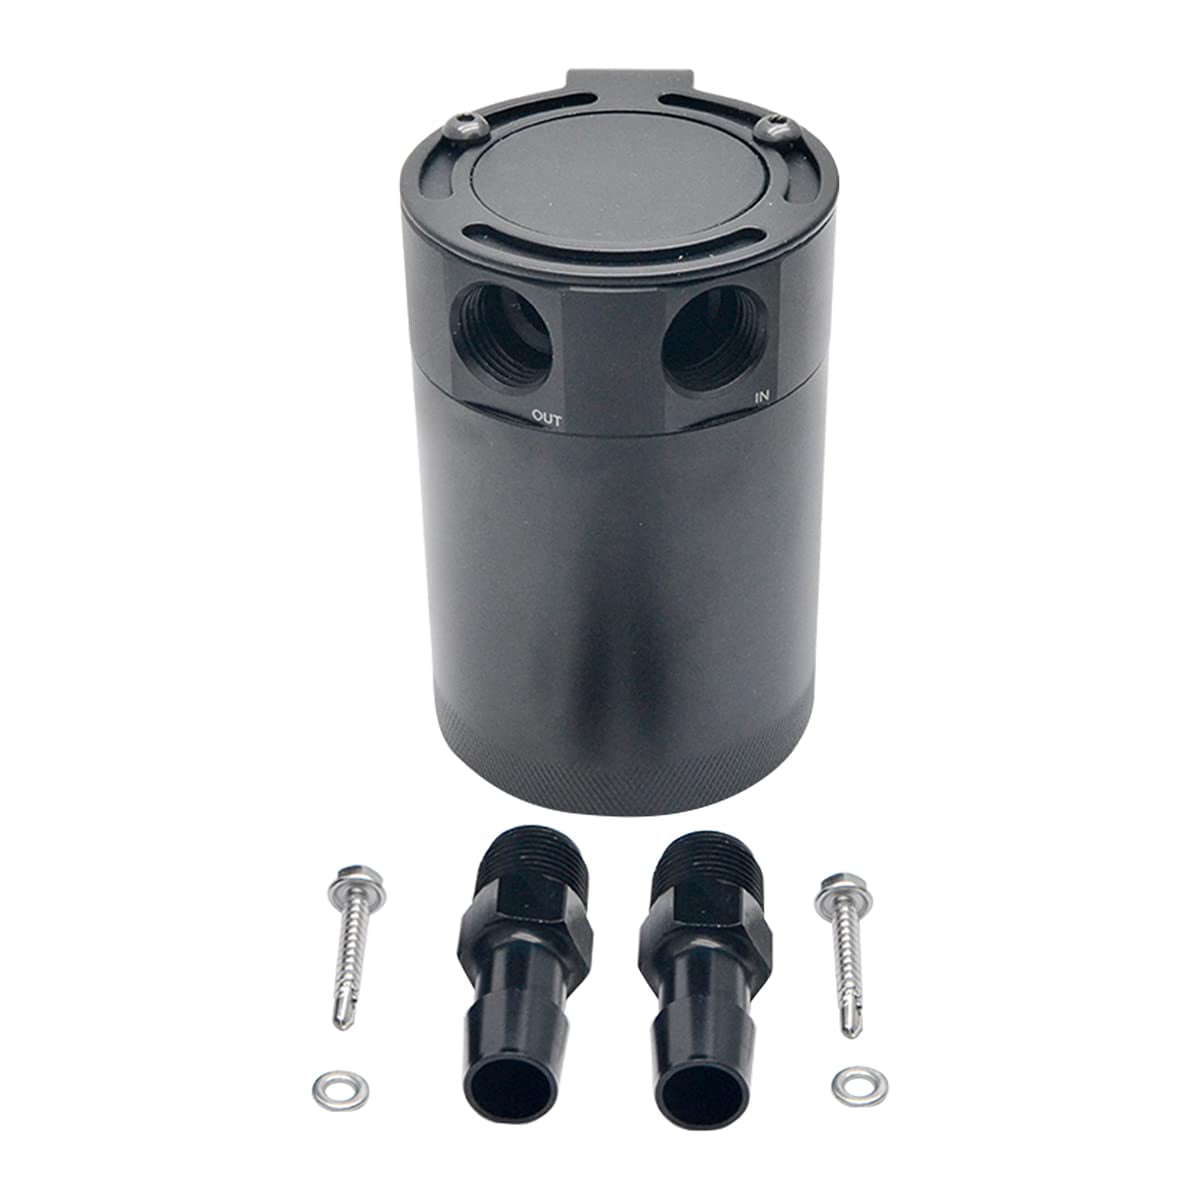 Black Universal Car Oil Catch Can Kit Reservoir Tank 400ml with Breather Aluminum Compact Dual Cylinder Polish Baffled Engine Air Oil Separator Tank Fit 